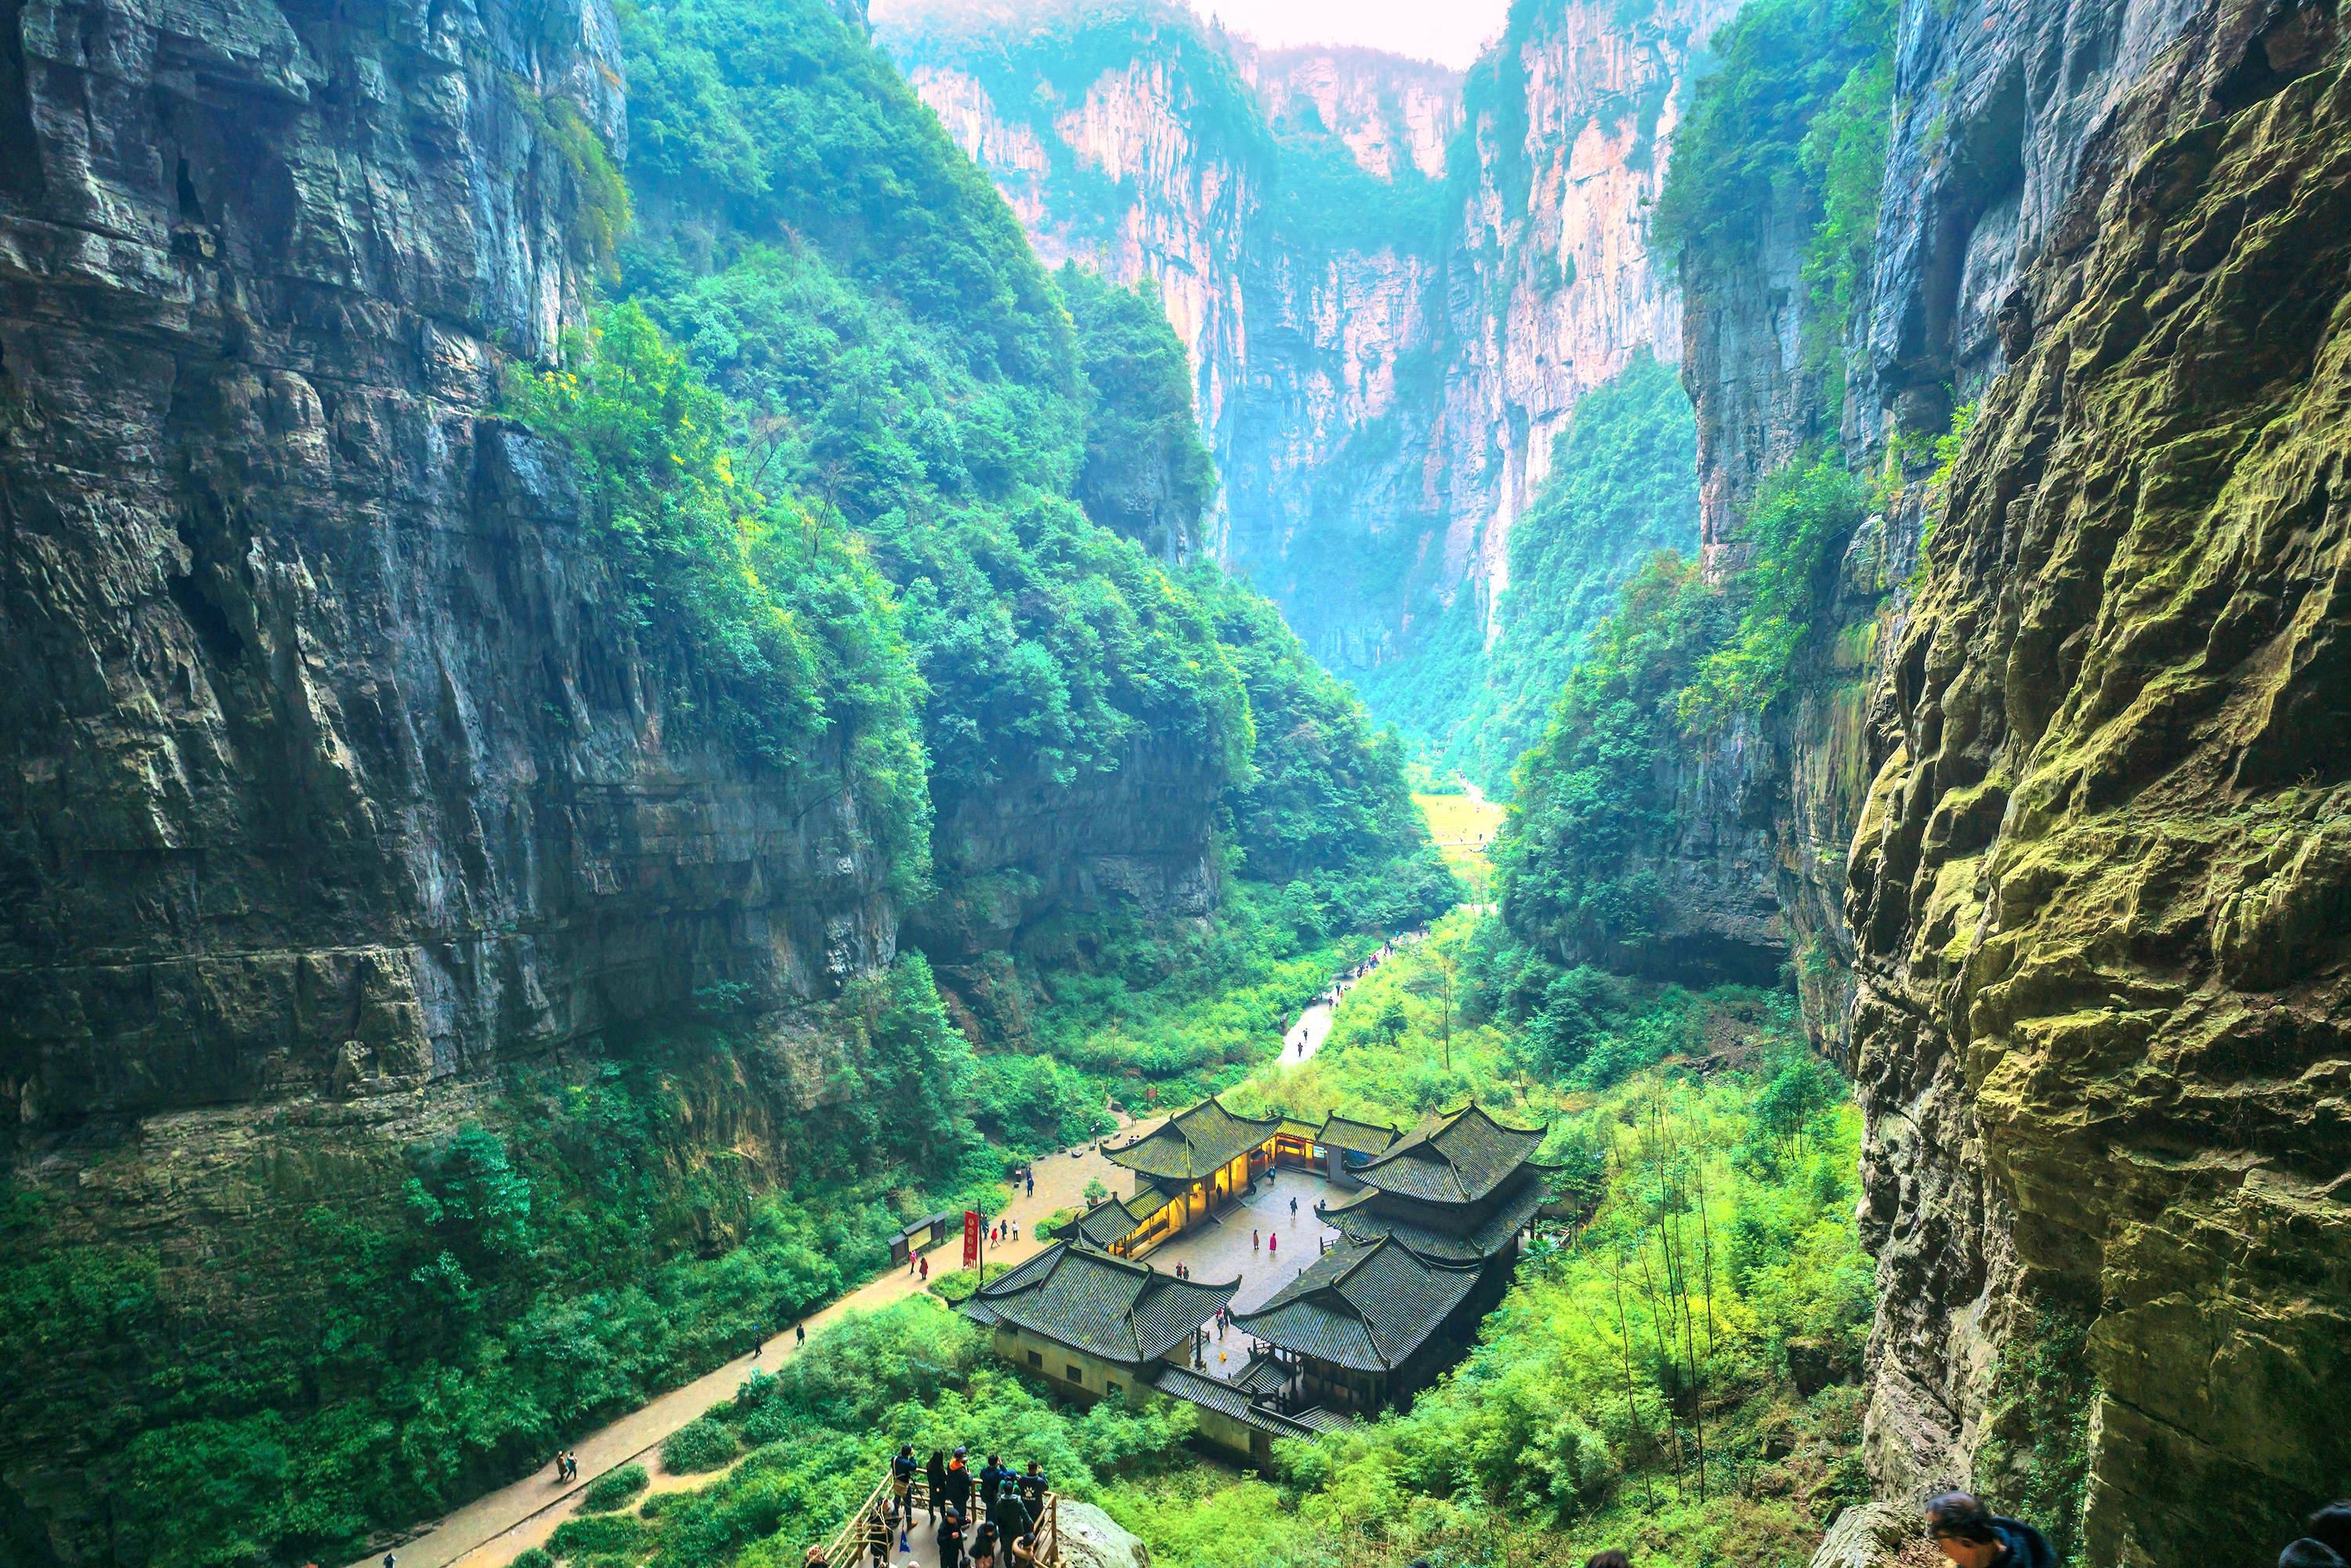 tourist attractions in chongqing